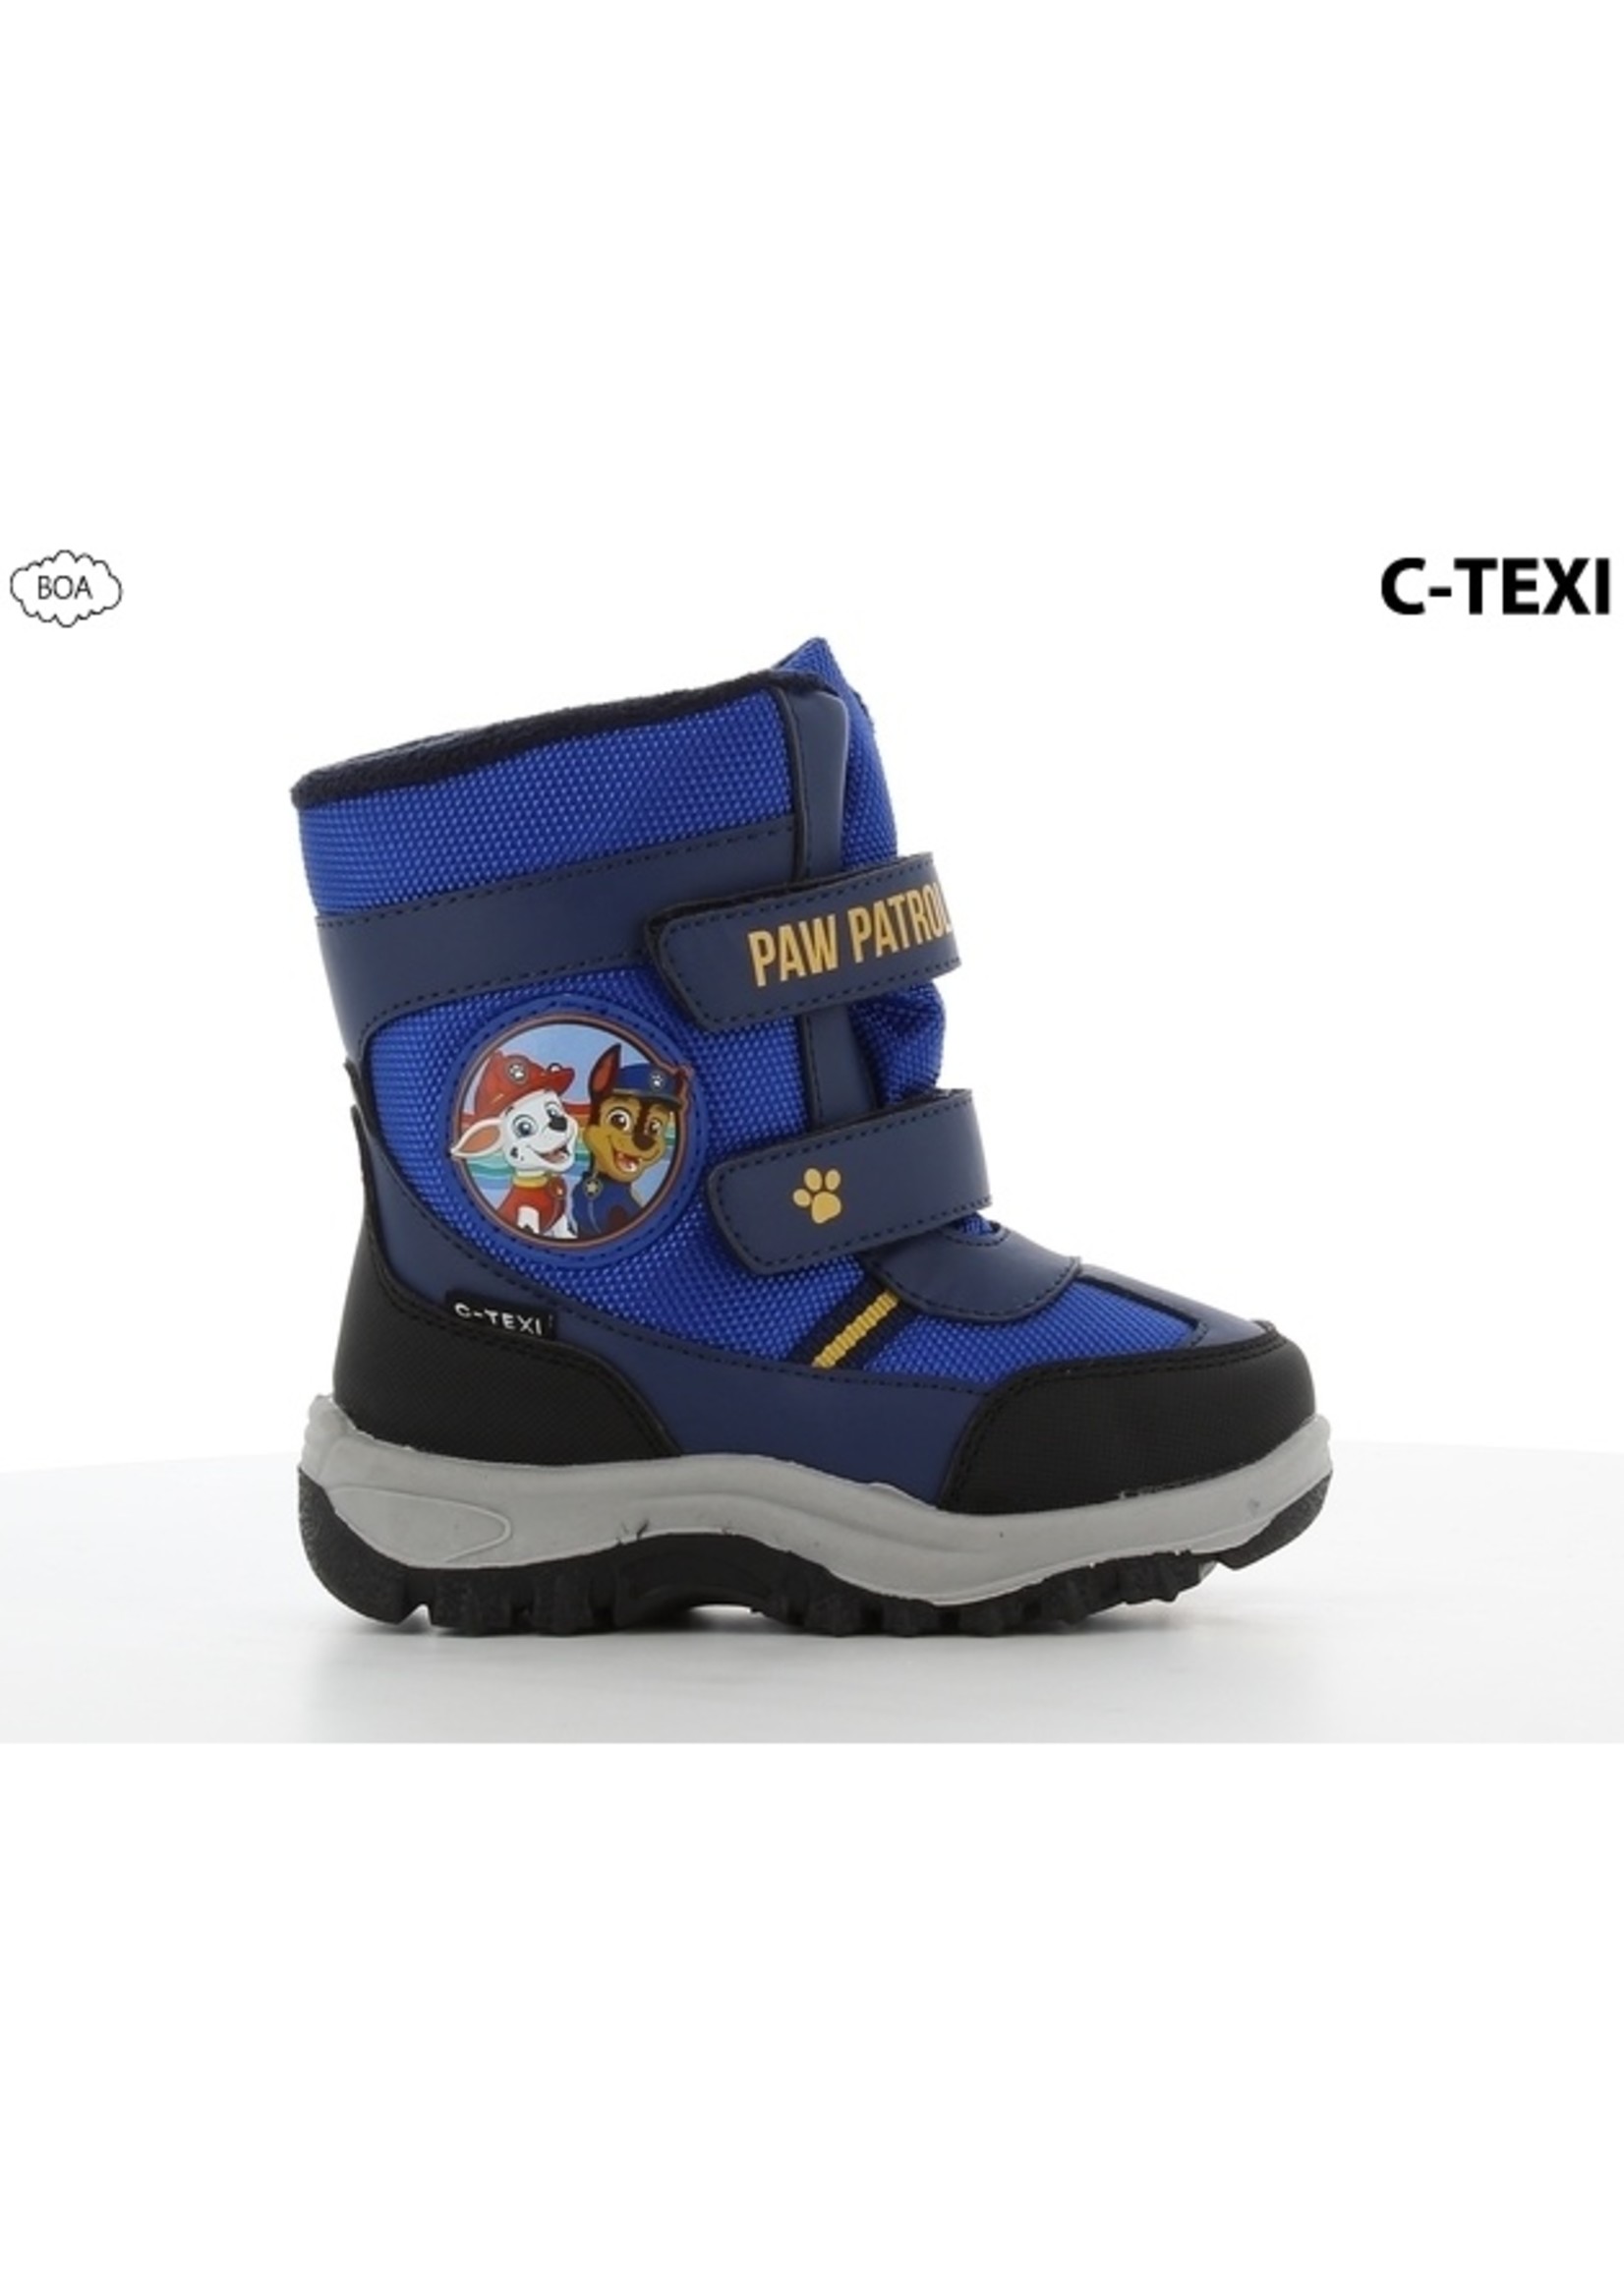 Nickelodeon Paw Patrol snow boots from Nickelodeon blue